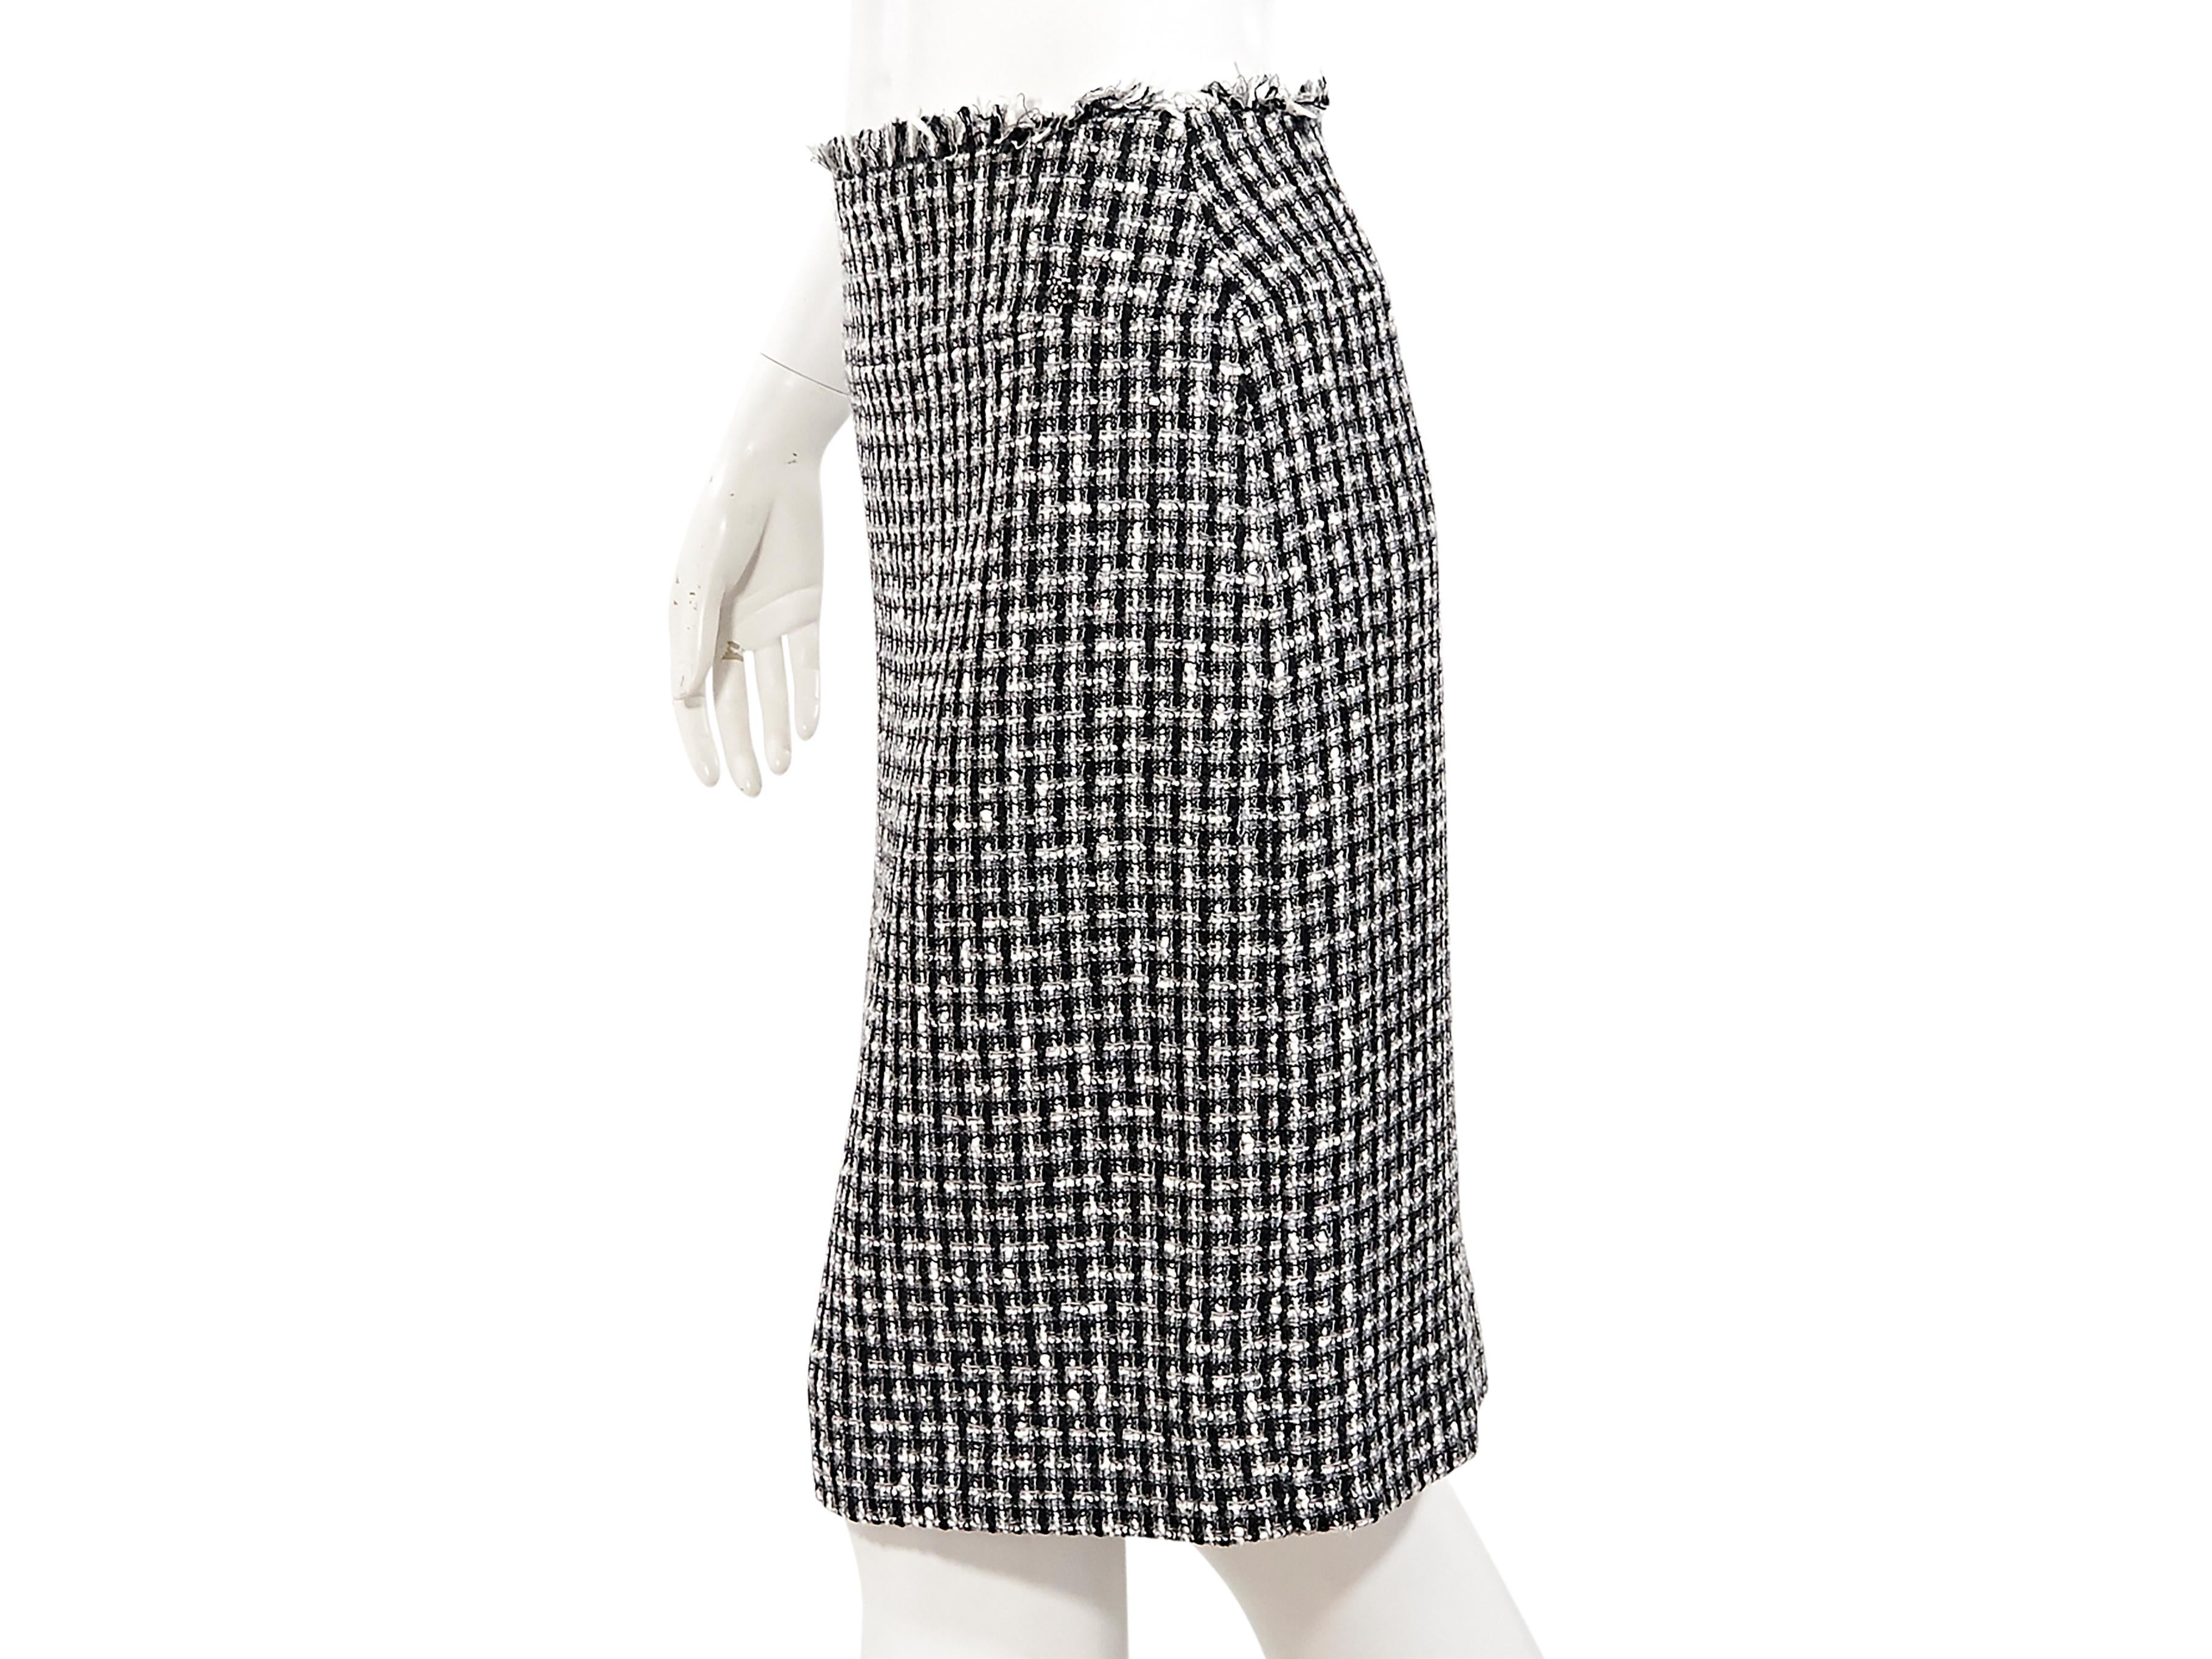 Product details:  Black and white boucle wool-blend pencil skirt by Chanel.  Frayed waist trim.  Concealed back zip closure.  Back center hem vent.  28